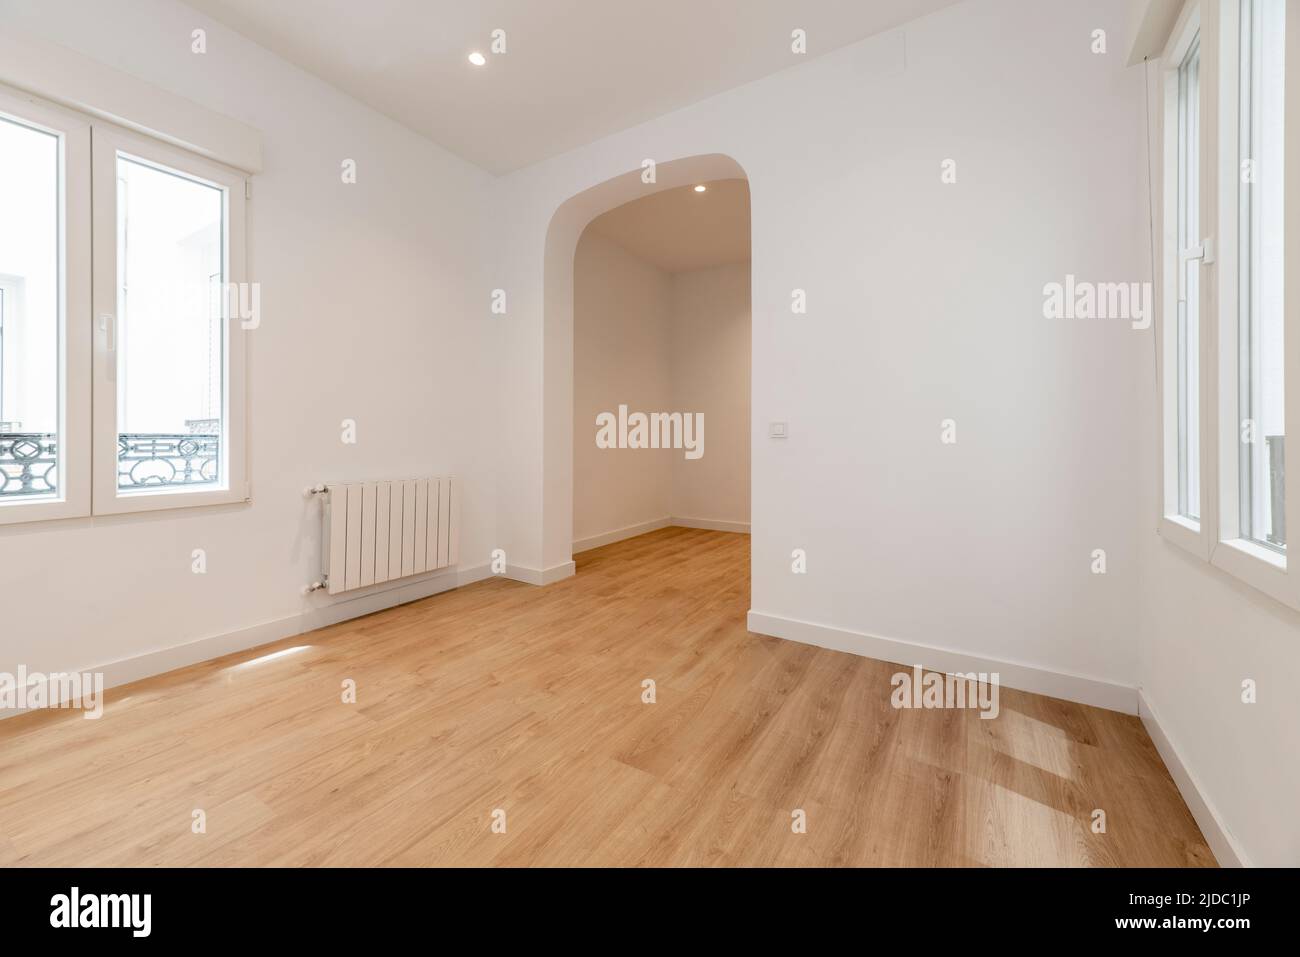 Empty room with white painted walls, oak laminate flooring, white aluminum windows and basket weave between rooms Stock Photo